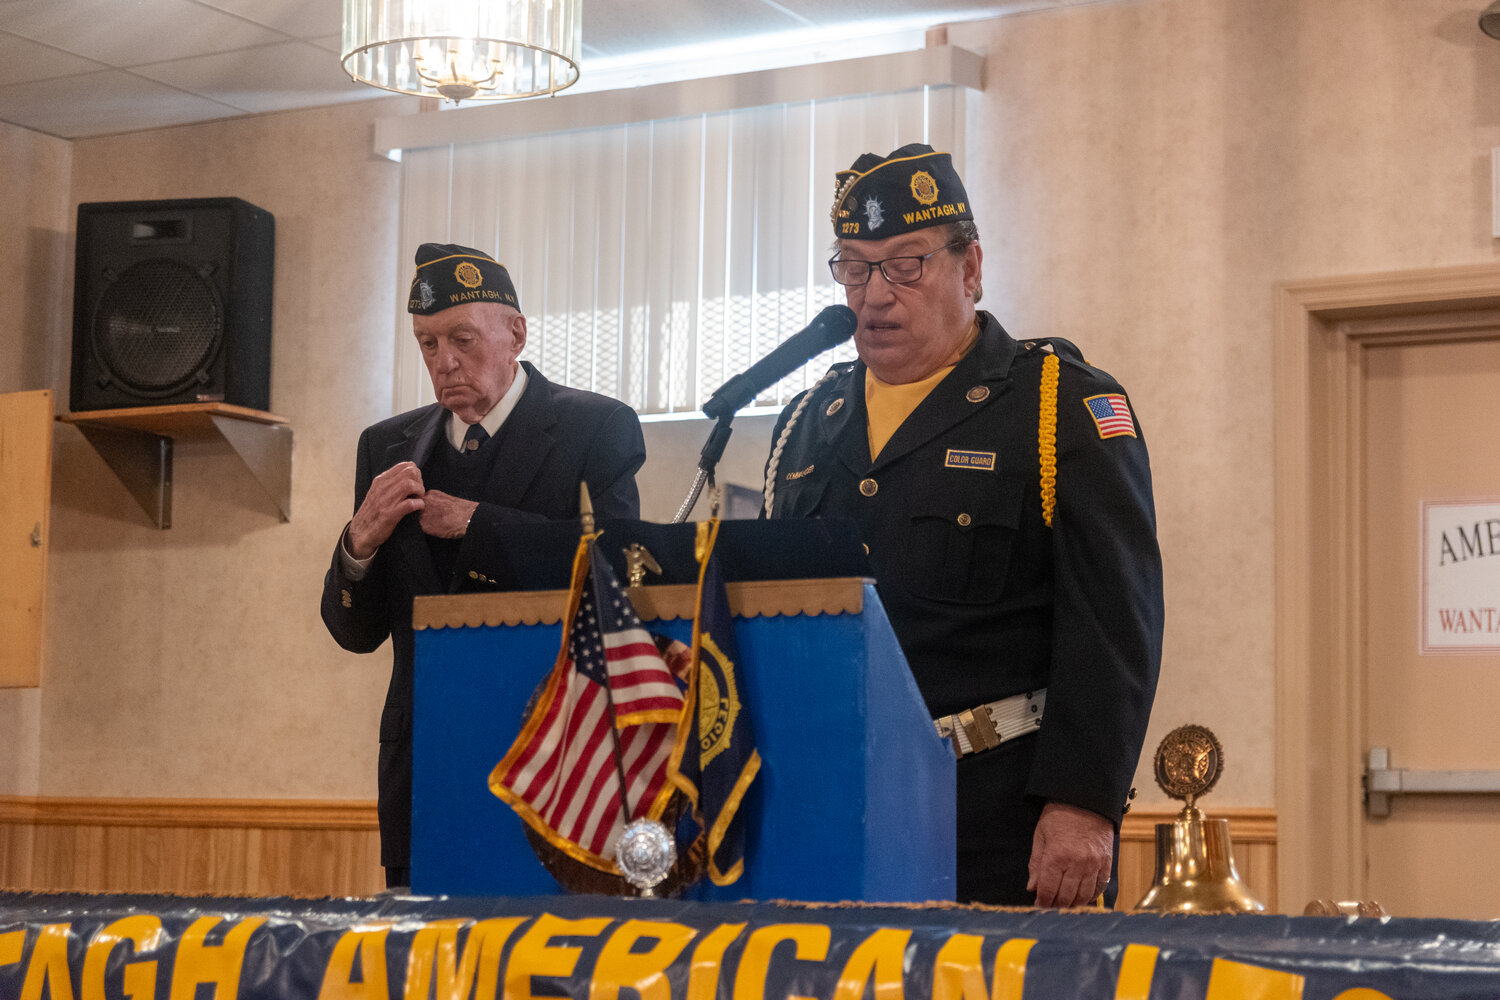 Tom McTigue and George Dibitetto speaking to a packed crowd at the Wantagh American Legion Post 1273 Veteran’s Day Ceremony.